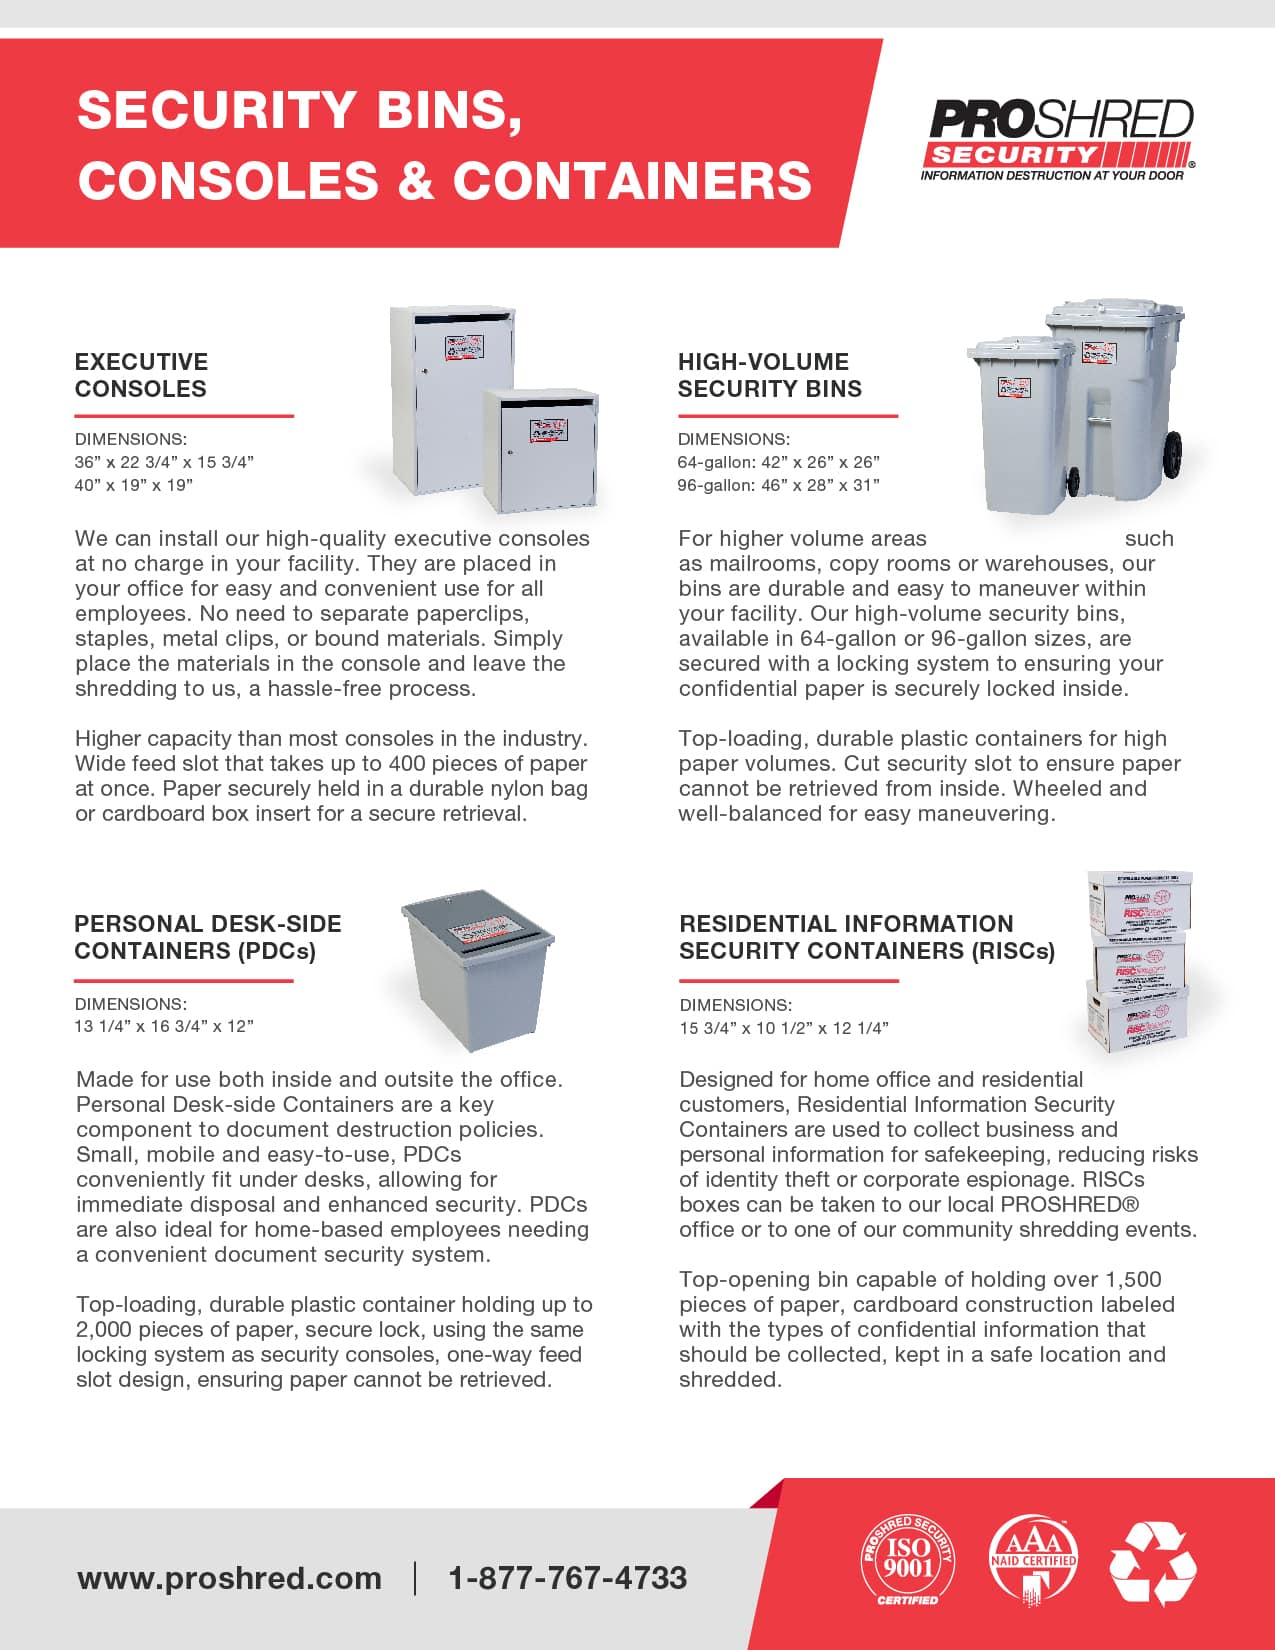 Image shows a variety of shredding bins and consoles to securely store confidential paper.